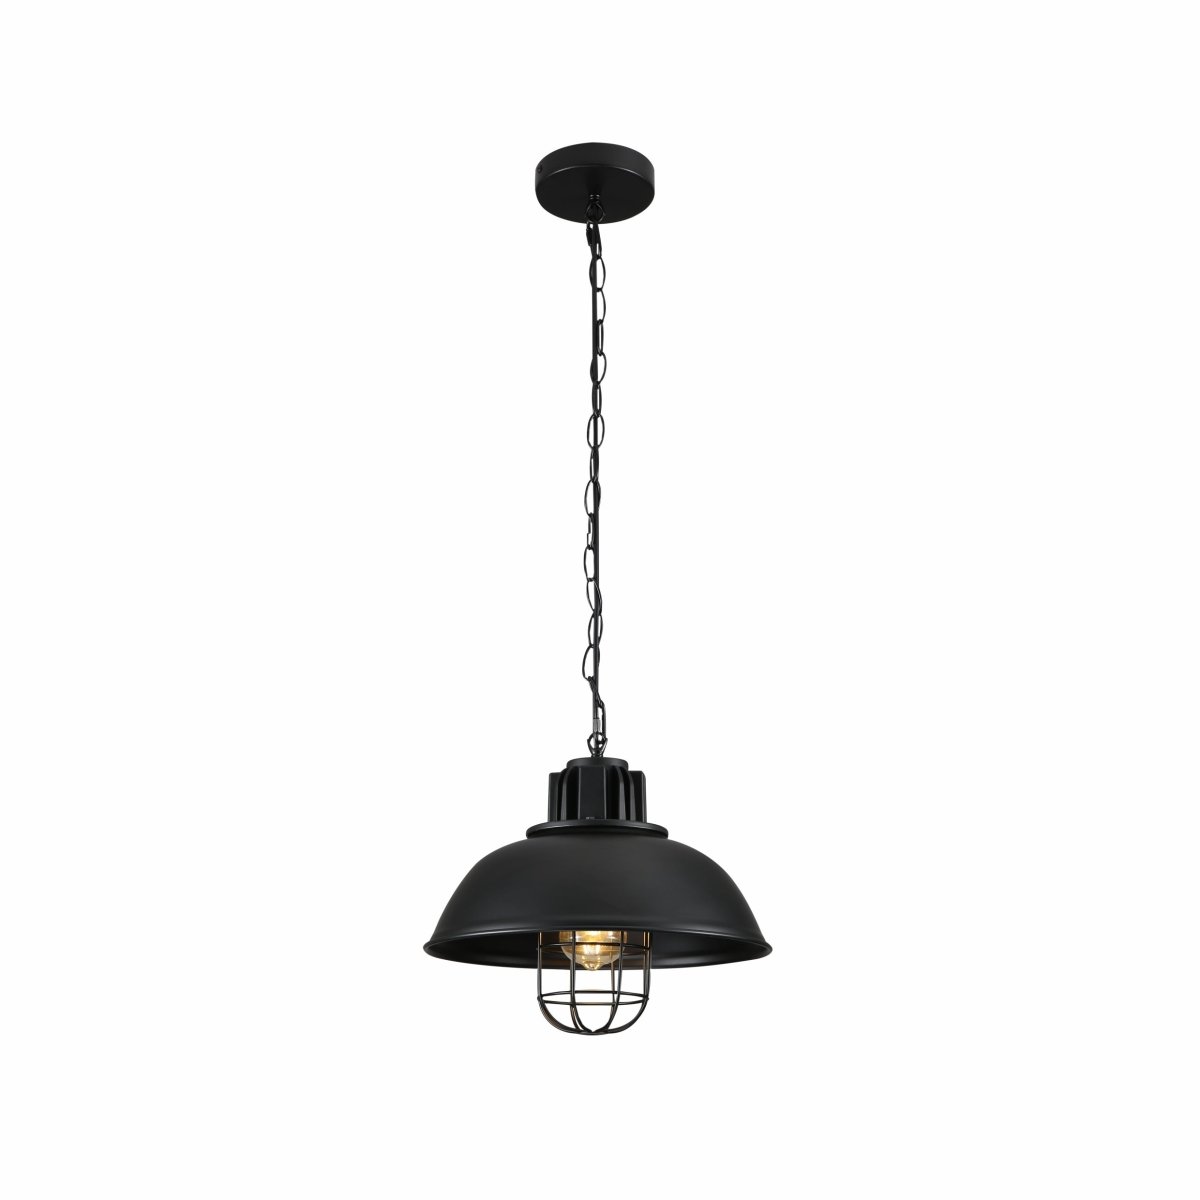 Main image of Black Dome Caged Industrial Metal Ceiling Pendant Light with E27 Fitting | TEKLED 150-18352